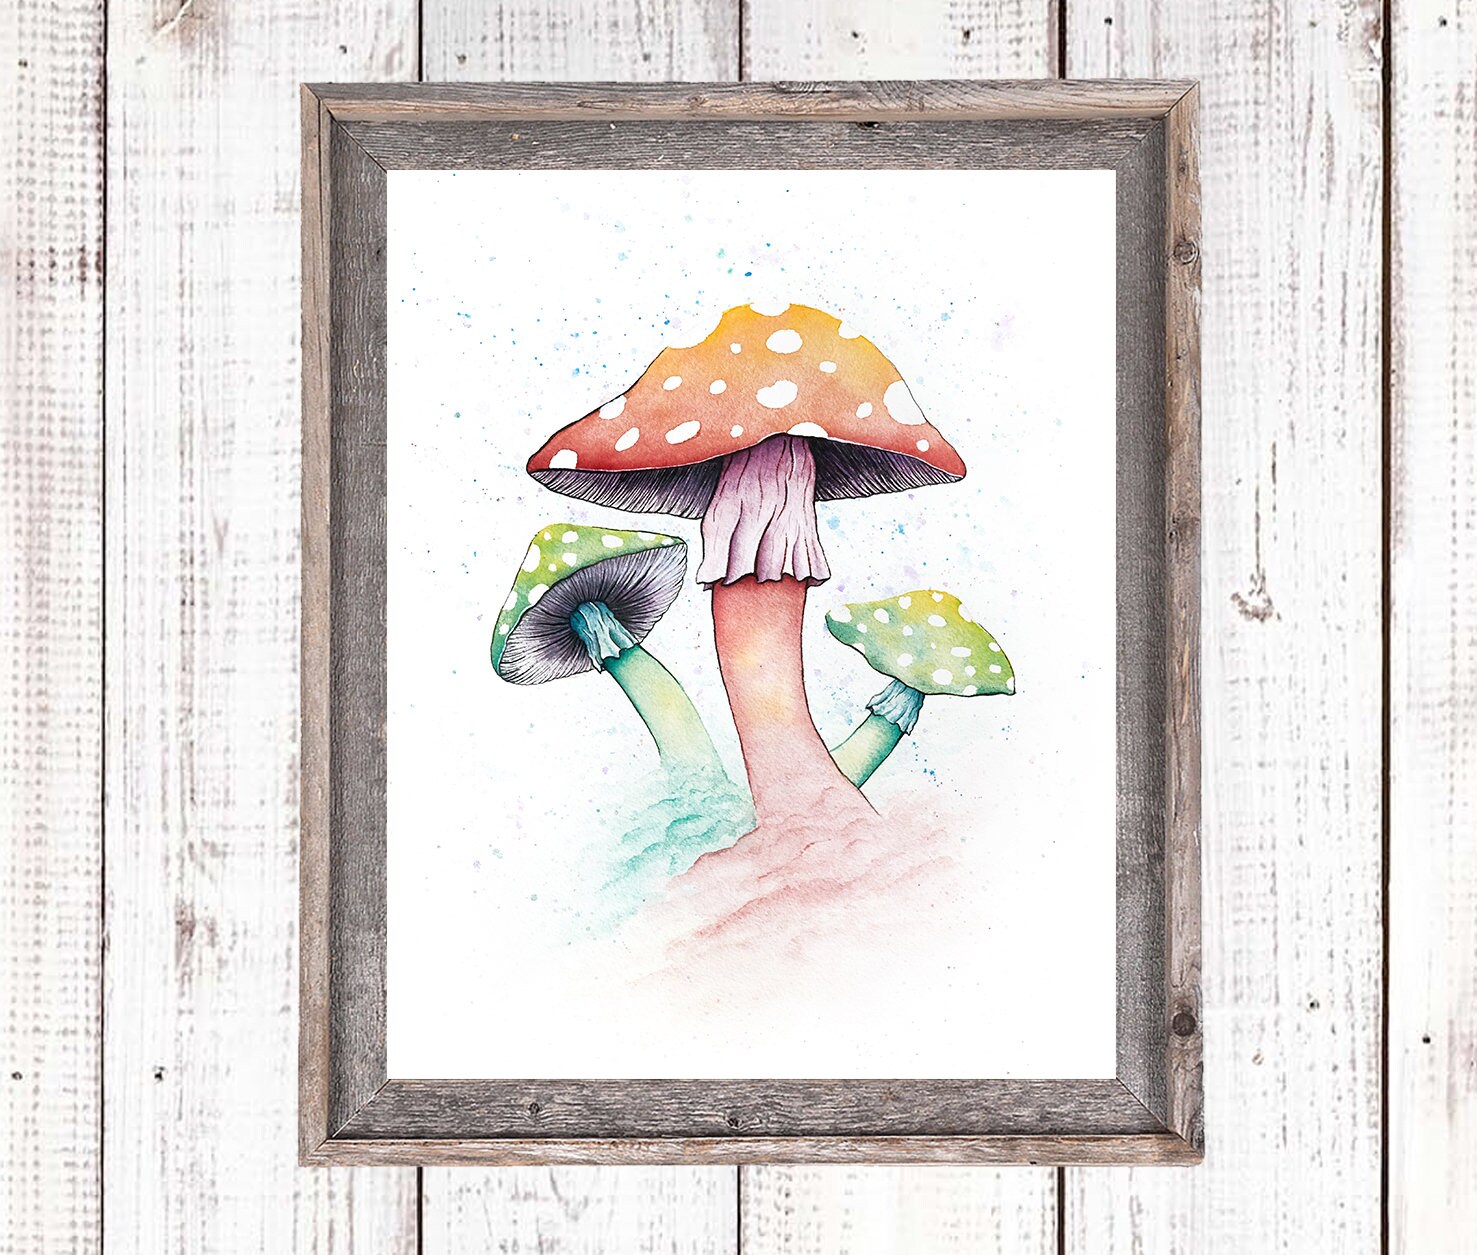 16 x 12 Whimsical Toadstool Painting Watercolour Girl/'s Room Decor A3 Mushroom Print in Grey and Pink Woodland Nursery Wall Art